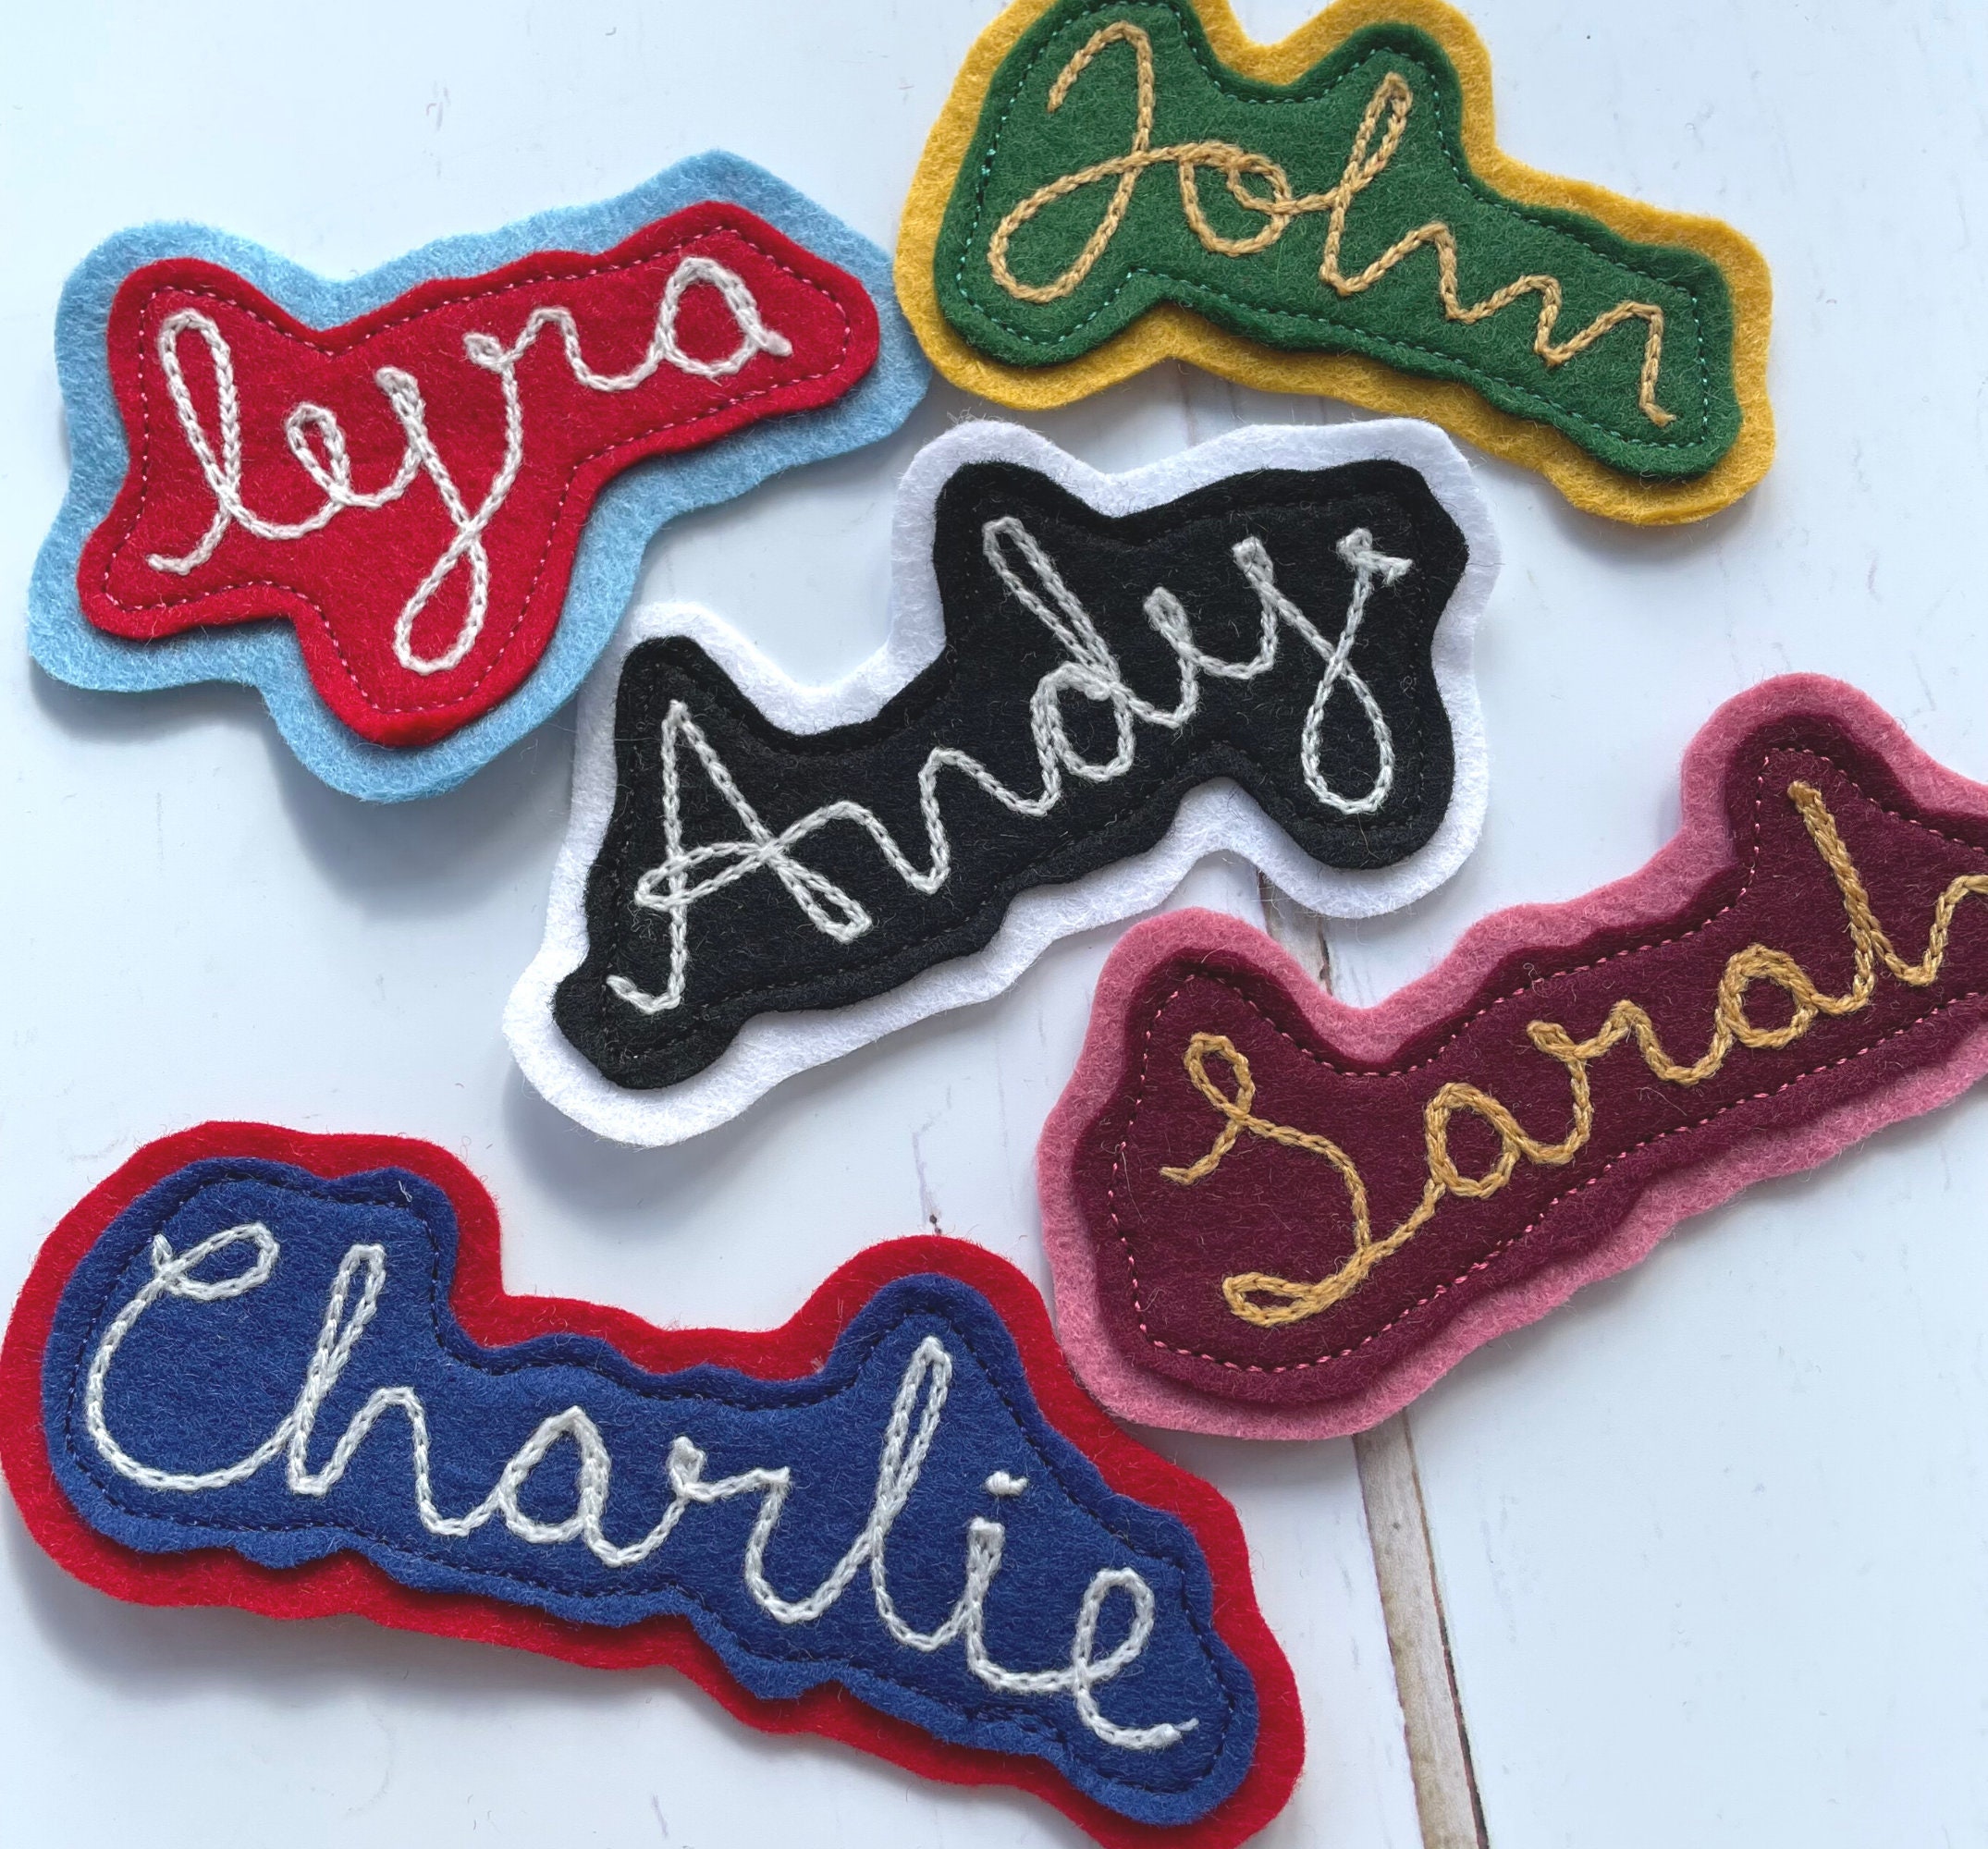 Custom Name Patches – Stitch Wicked Shop